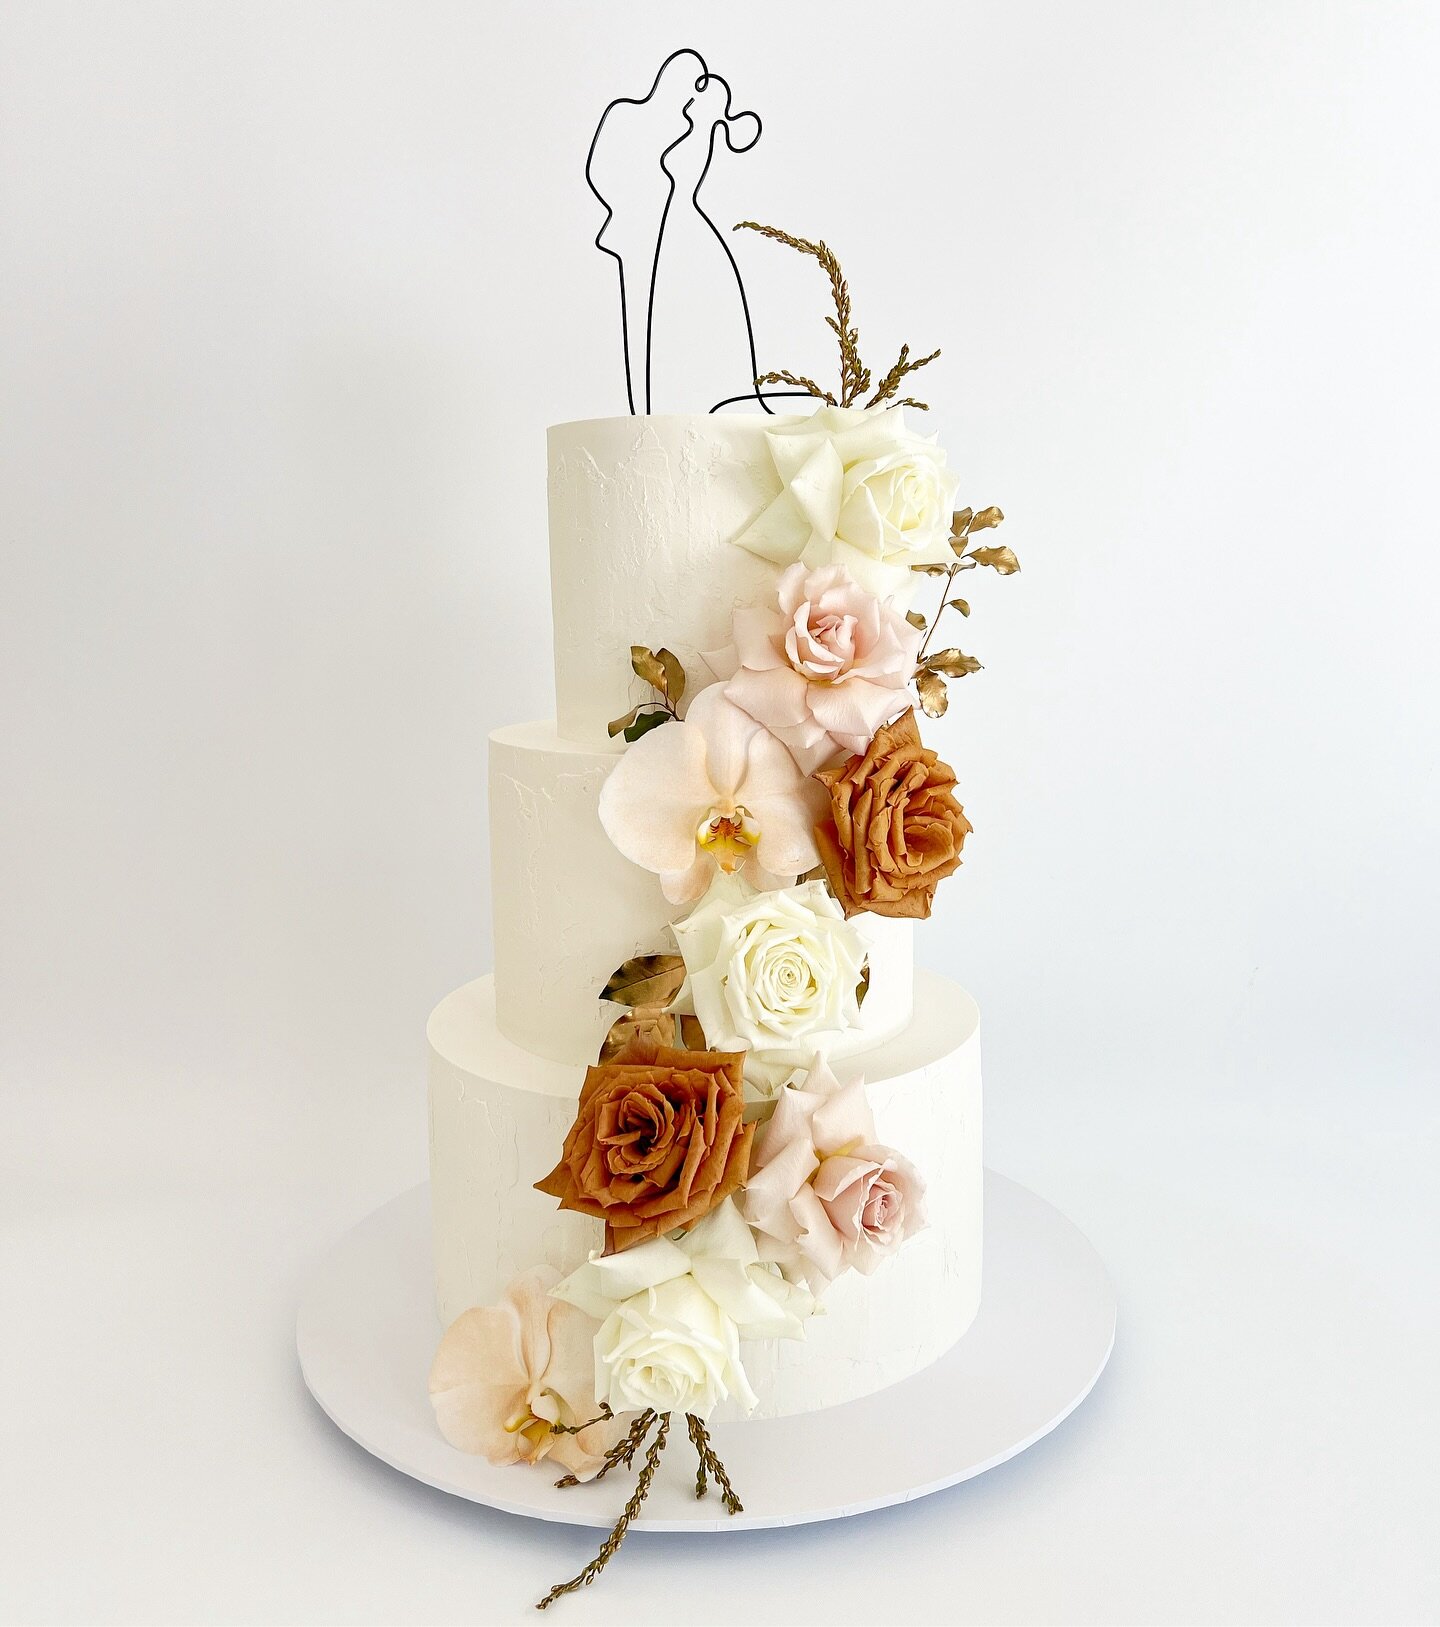 My first wedding cake of the month started off with this gorgeous floral cascade with toffee, white and pale pink roses! 🧡
.
@jacquimdesign 
#frostedindulgence #brisbanecakes #brisbanewedding #brisbaneweddingcake #weddingcake #freshflowerscake #fres